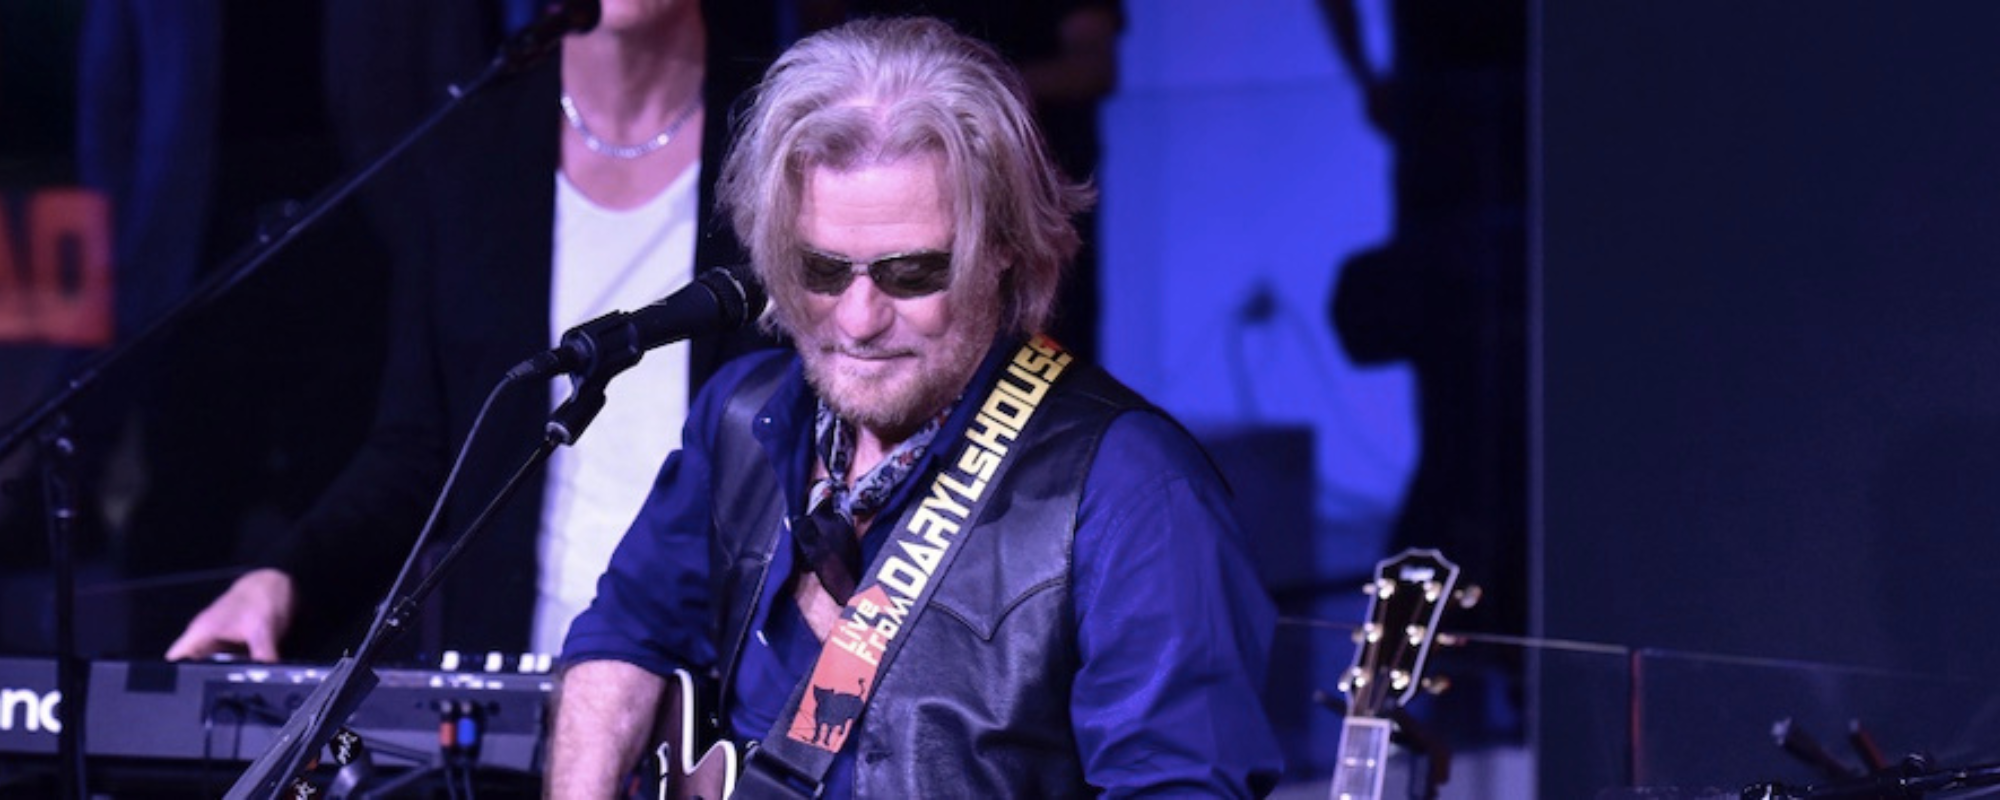 Daryl Hall Launches a New Season of ‘Live from Daryl’s House’ This Week with Guest Glen Tilbrook of Squeeze